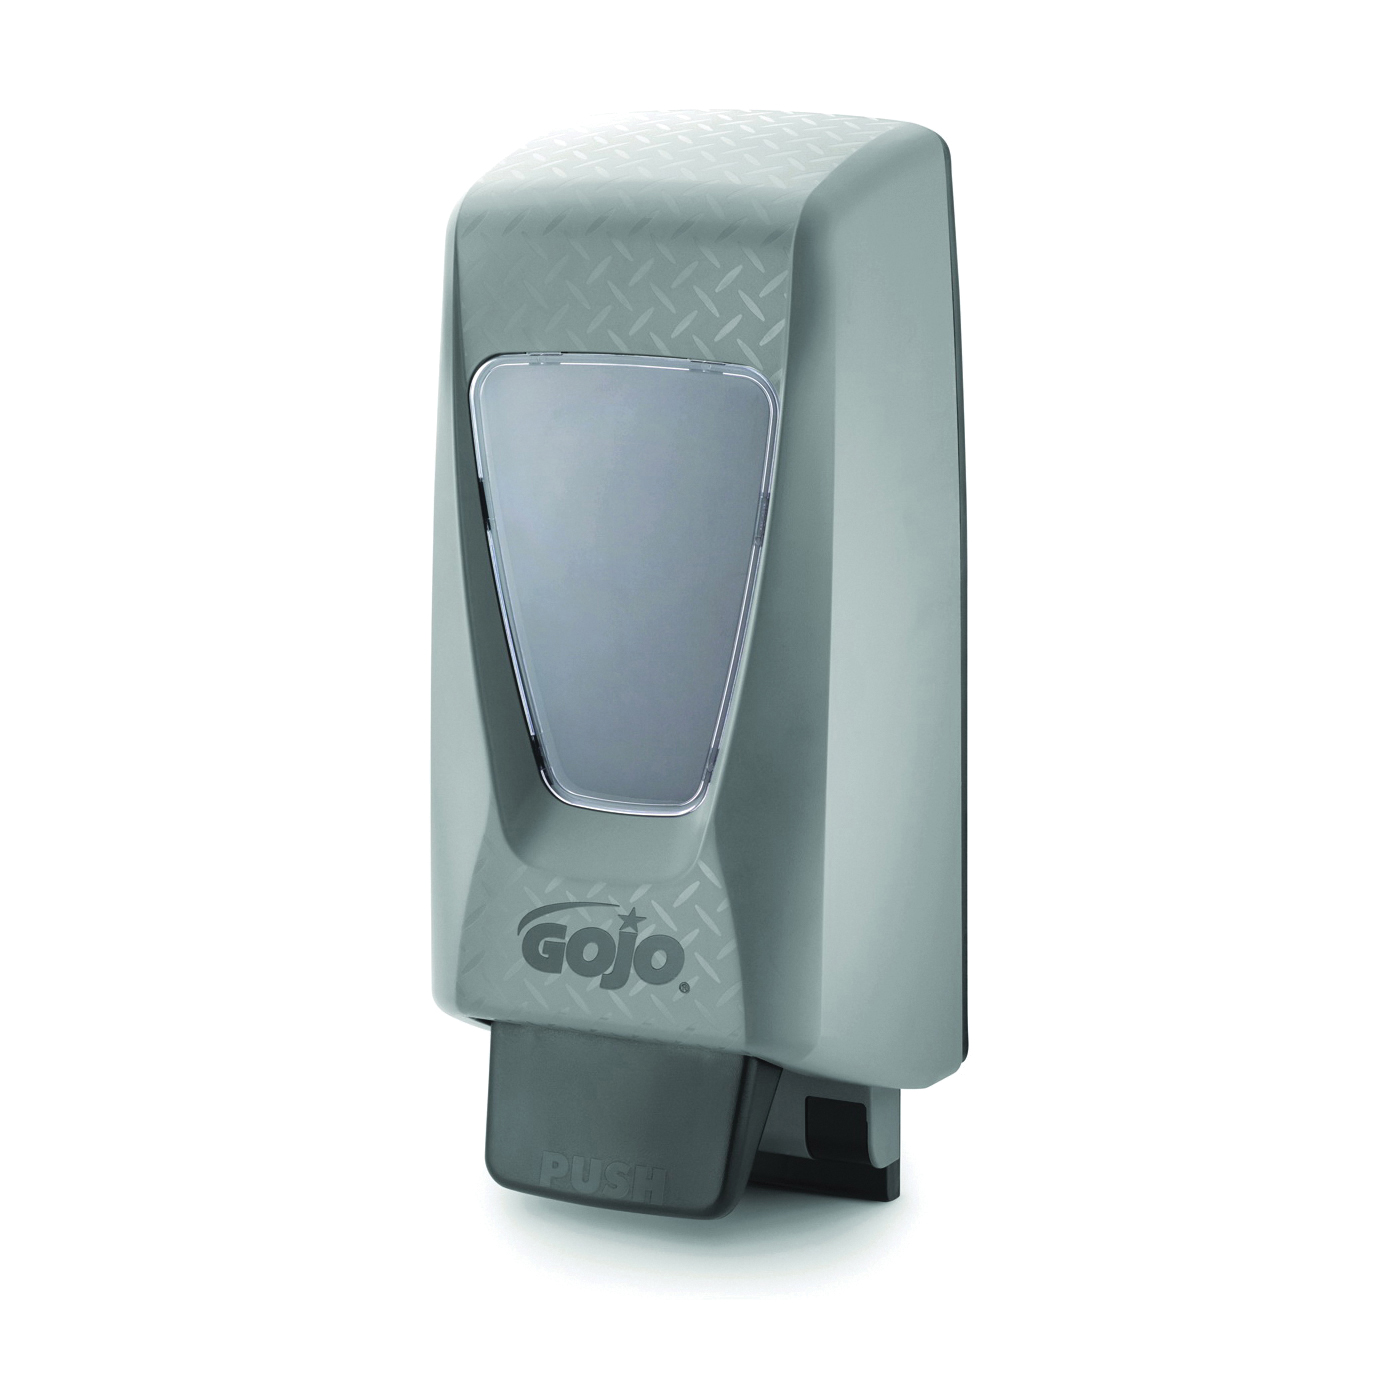 PRO TDX 7200-01 Hand Sanitizer Dispenser, 2000 mL, ABS/Polycarbonate, Gray, Wall